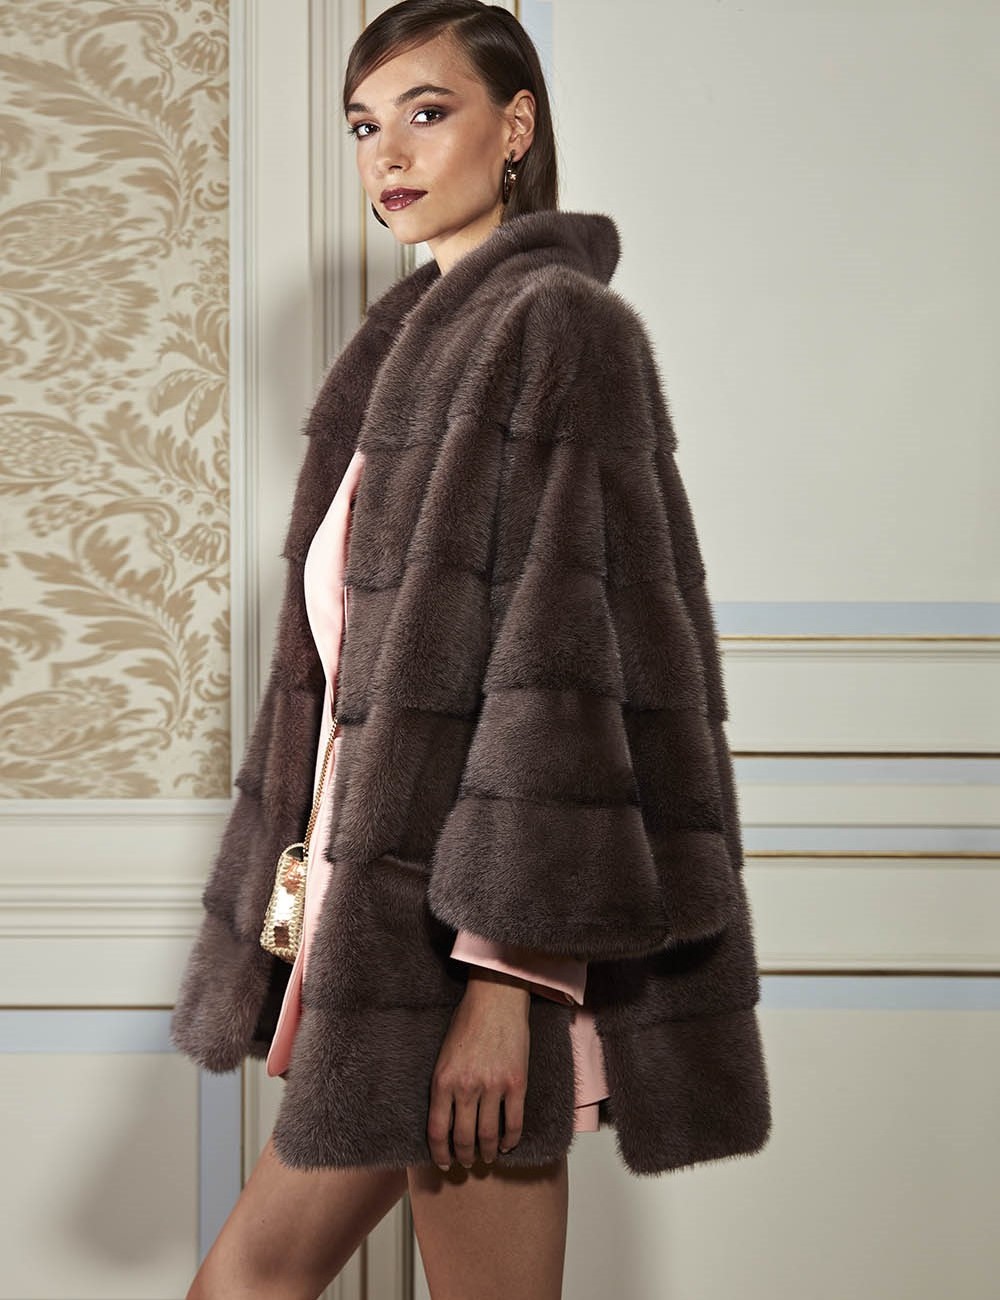 Brown mink jacket with a stylish new look